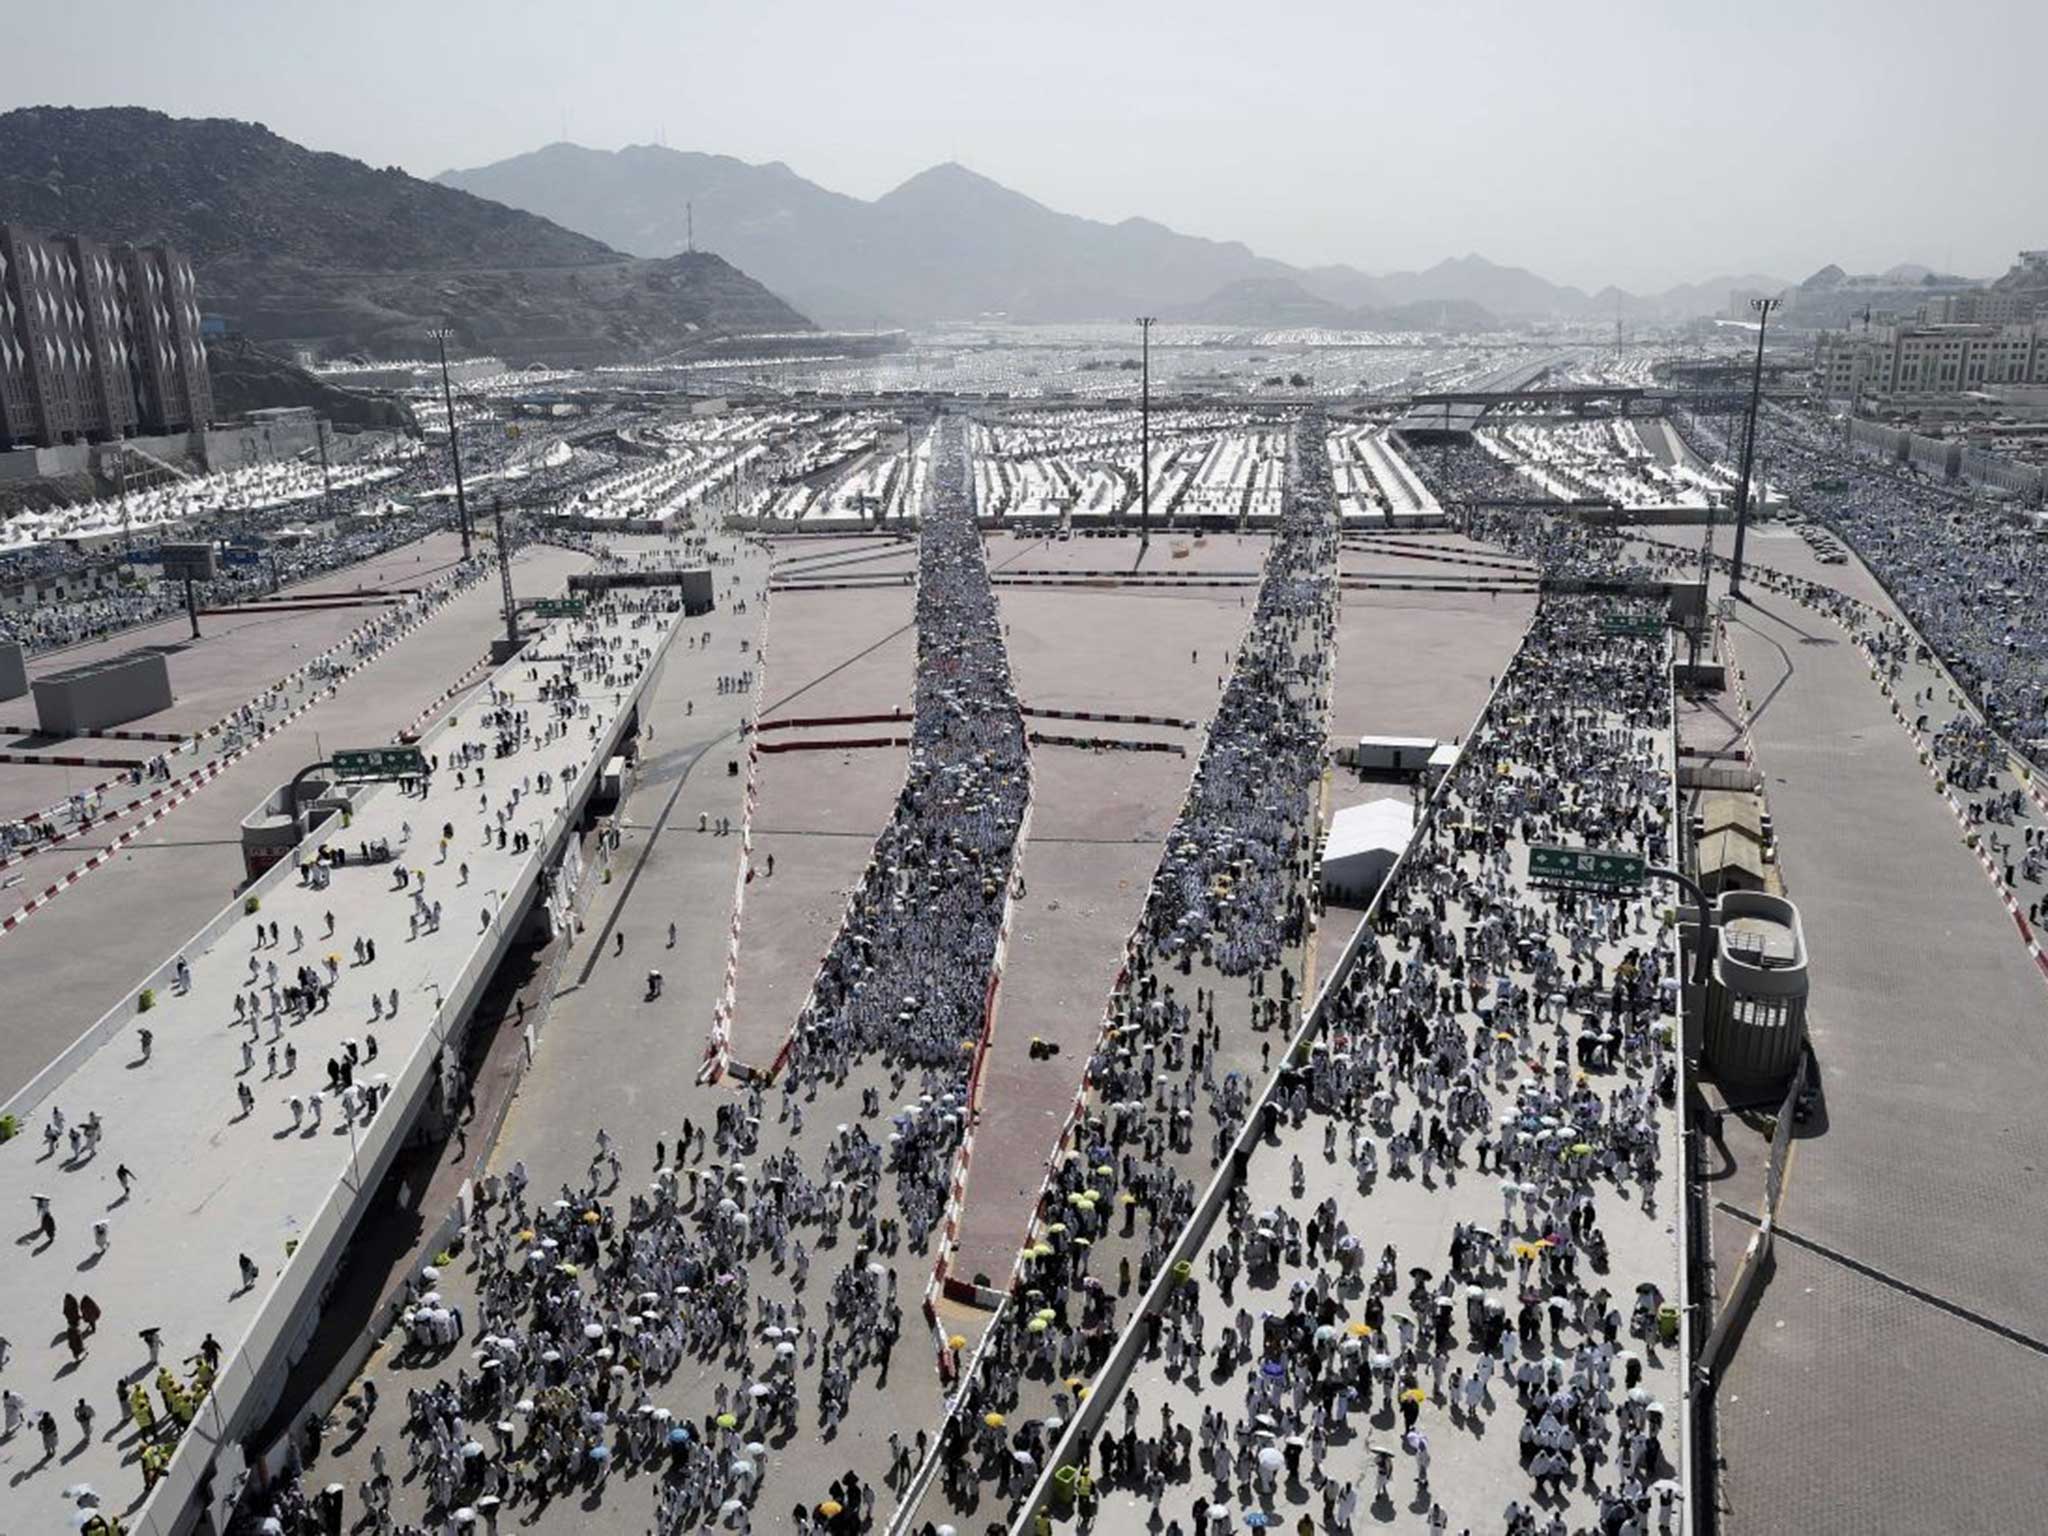 The route into throw pebbles at pillars during the 'Jamarat' ritual, the stoning of the Devil